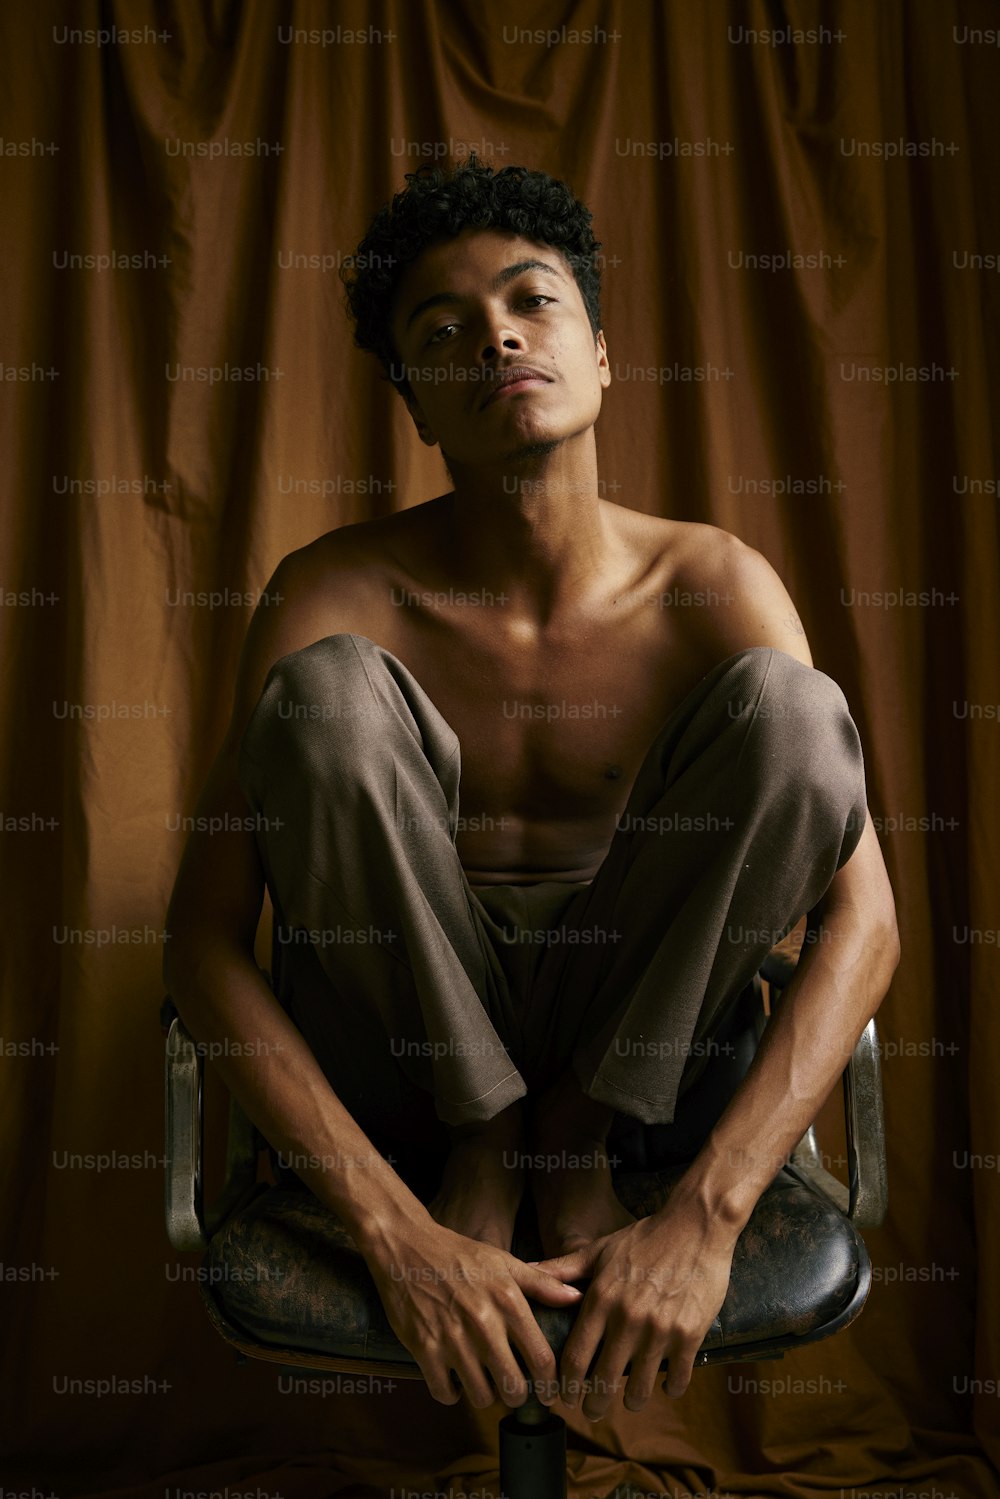 a shirtless man sitting on a chair in front of a curtain